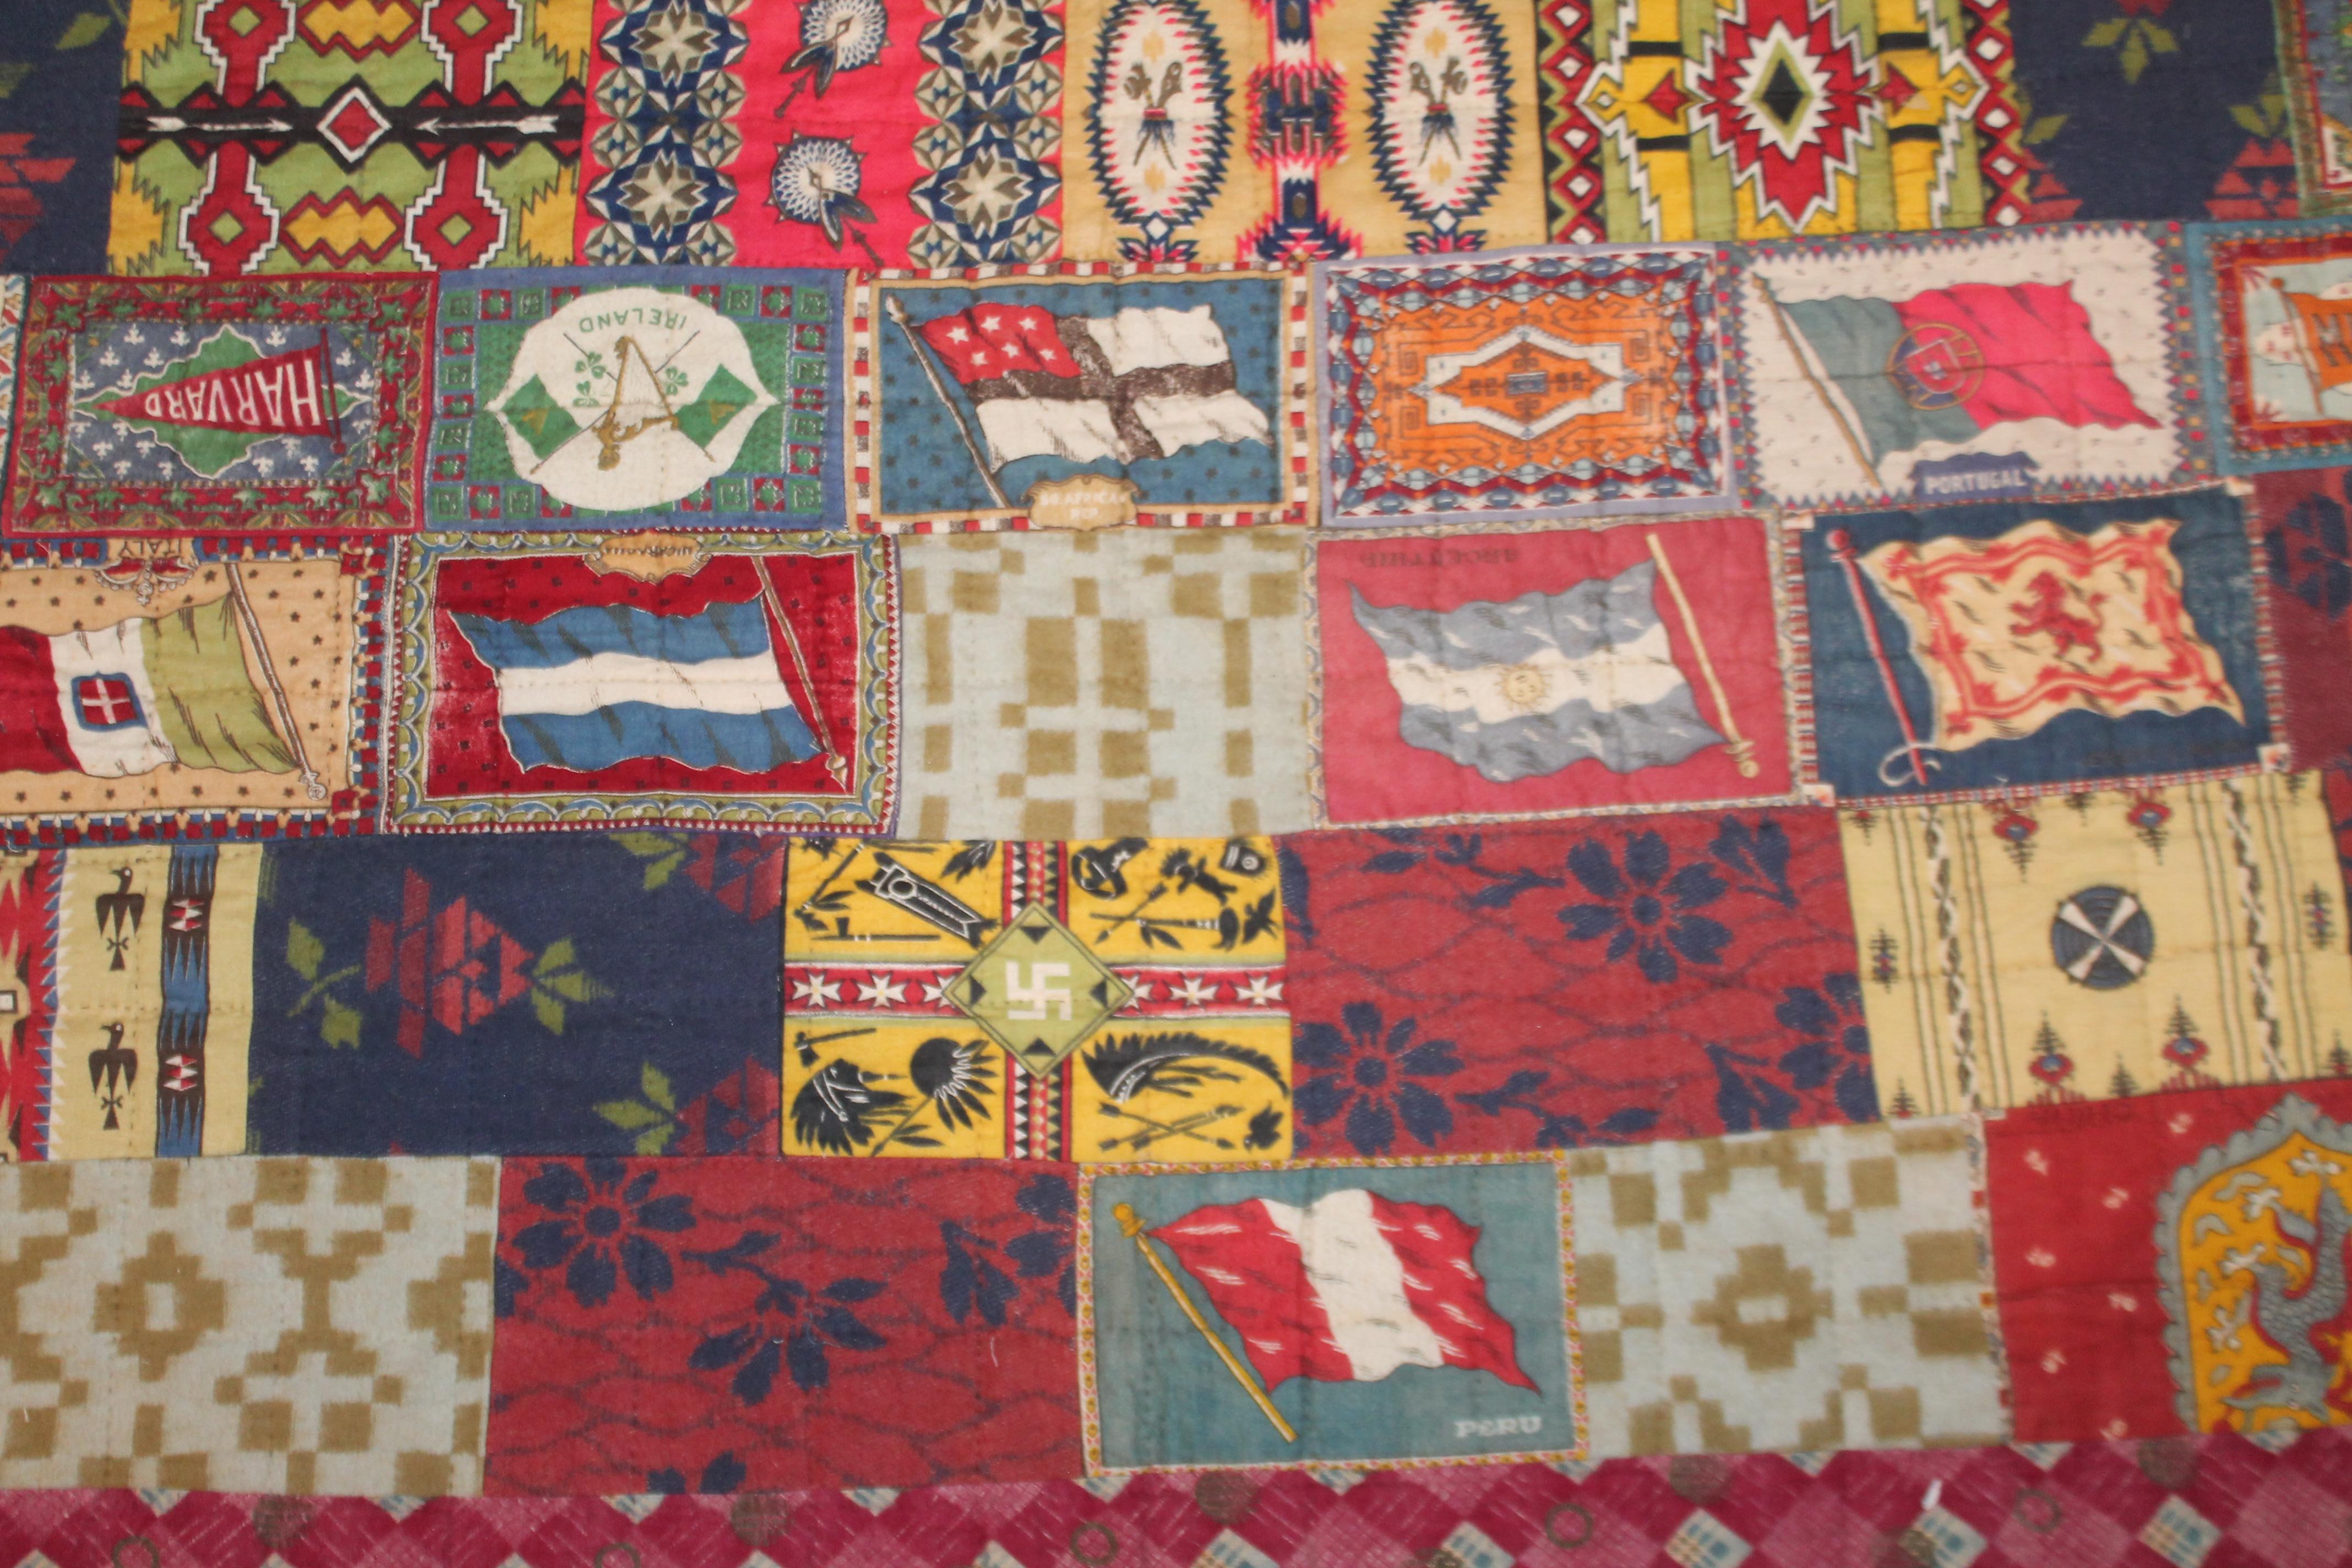 20th Century Multi-Country Flag Flannel Quilt with Indian Blanket Trim